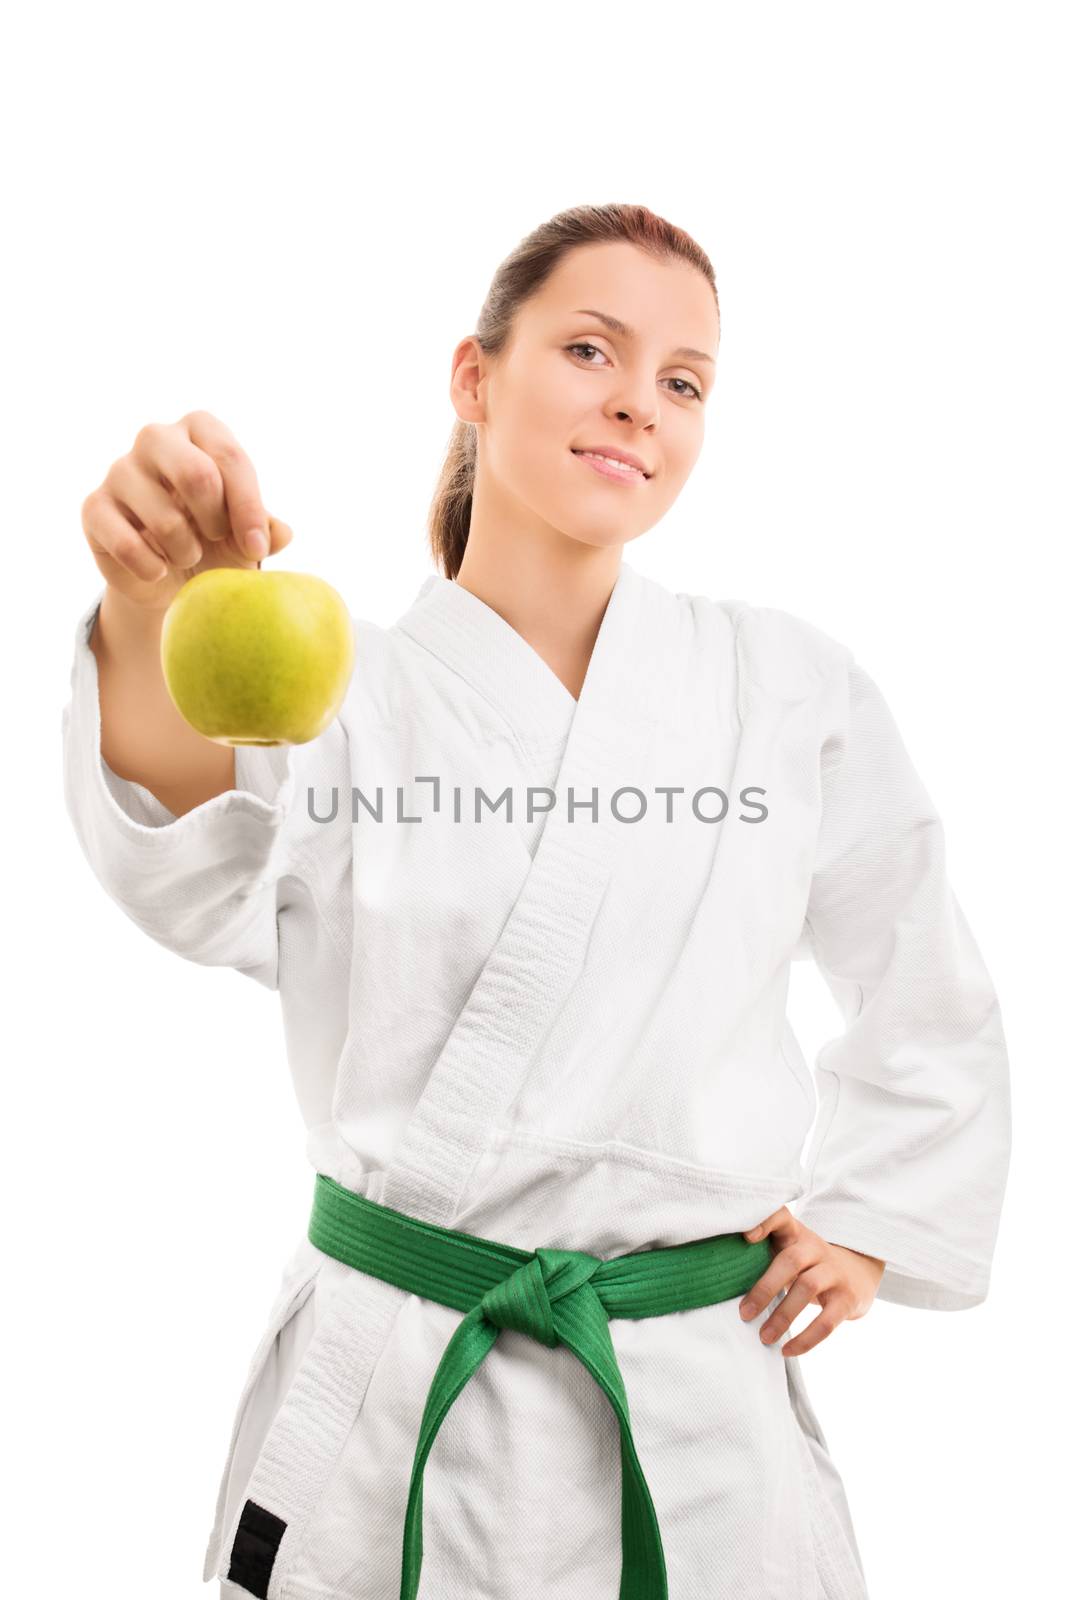 Sports and healthy eating. Beautiful smiling young girl in kimono with green belt offering an apple, isolated on white background.